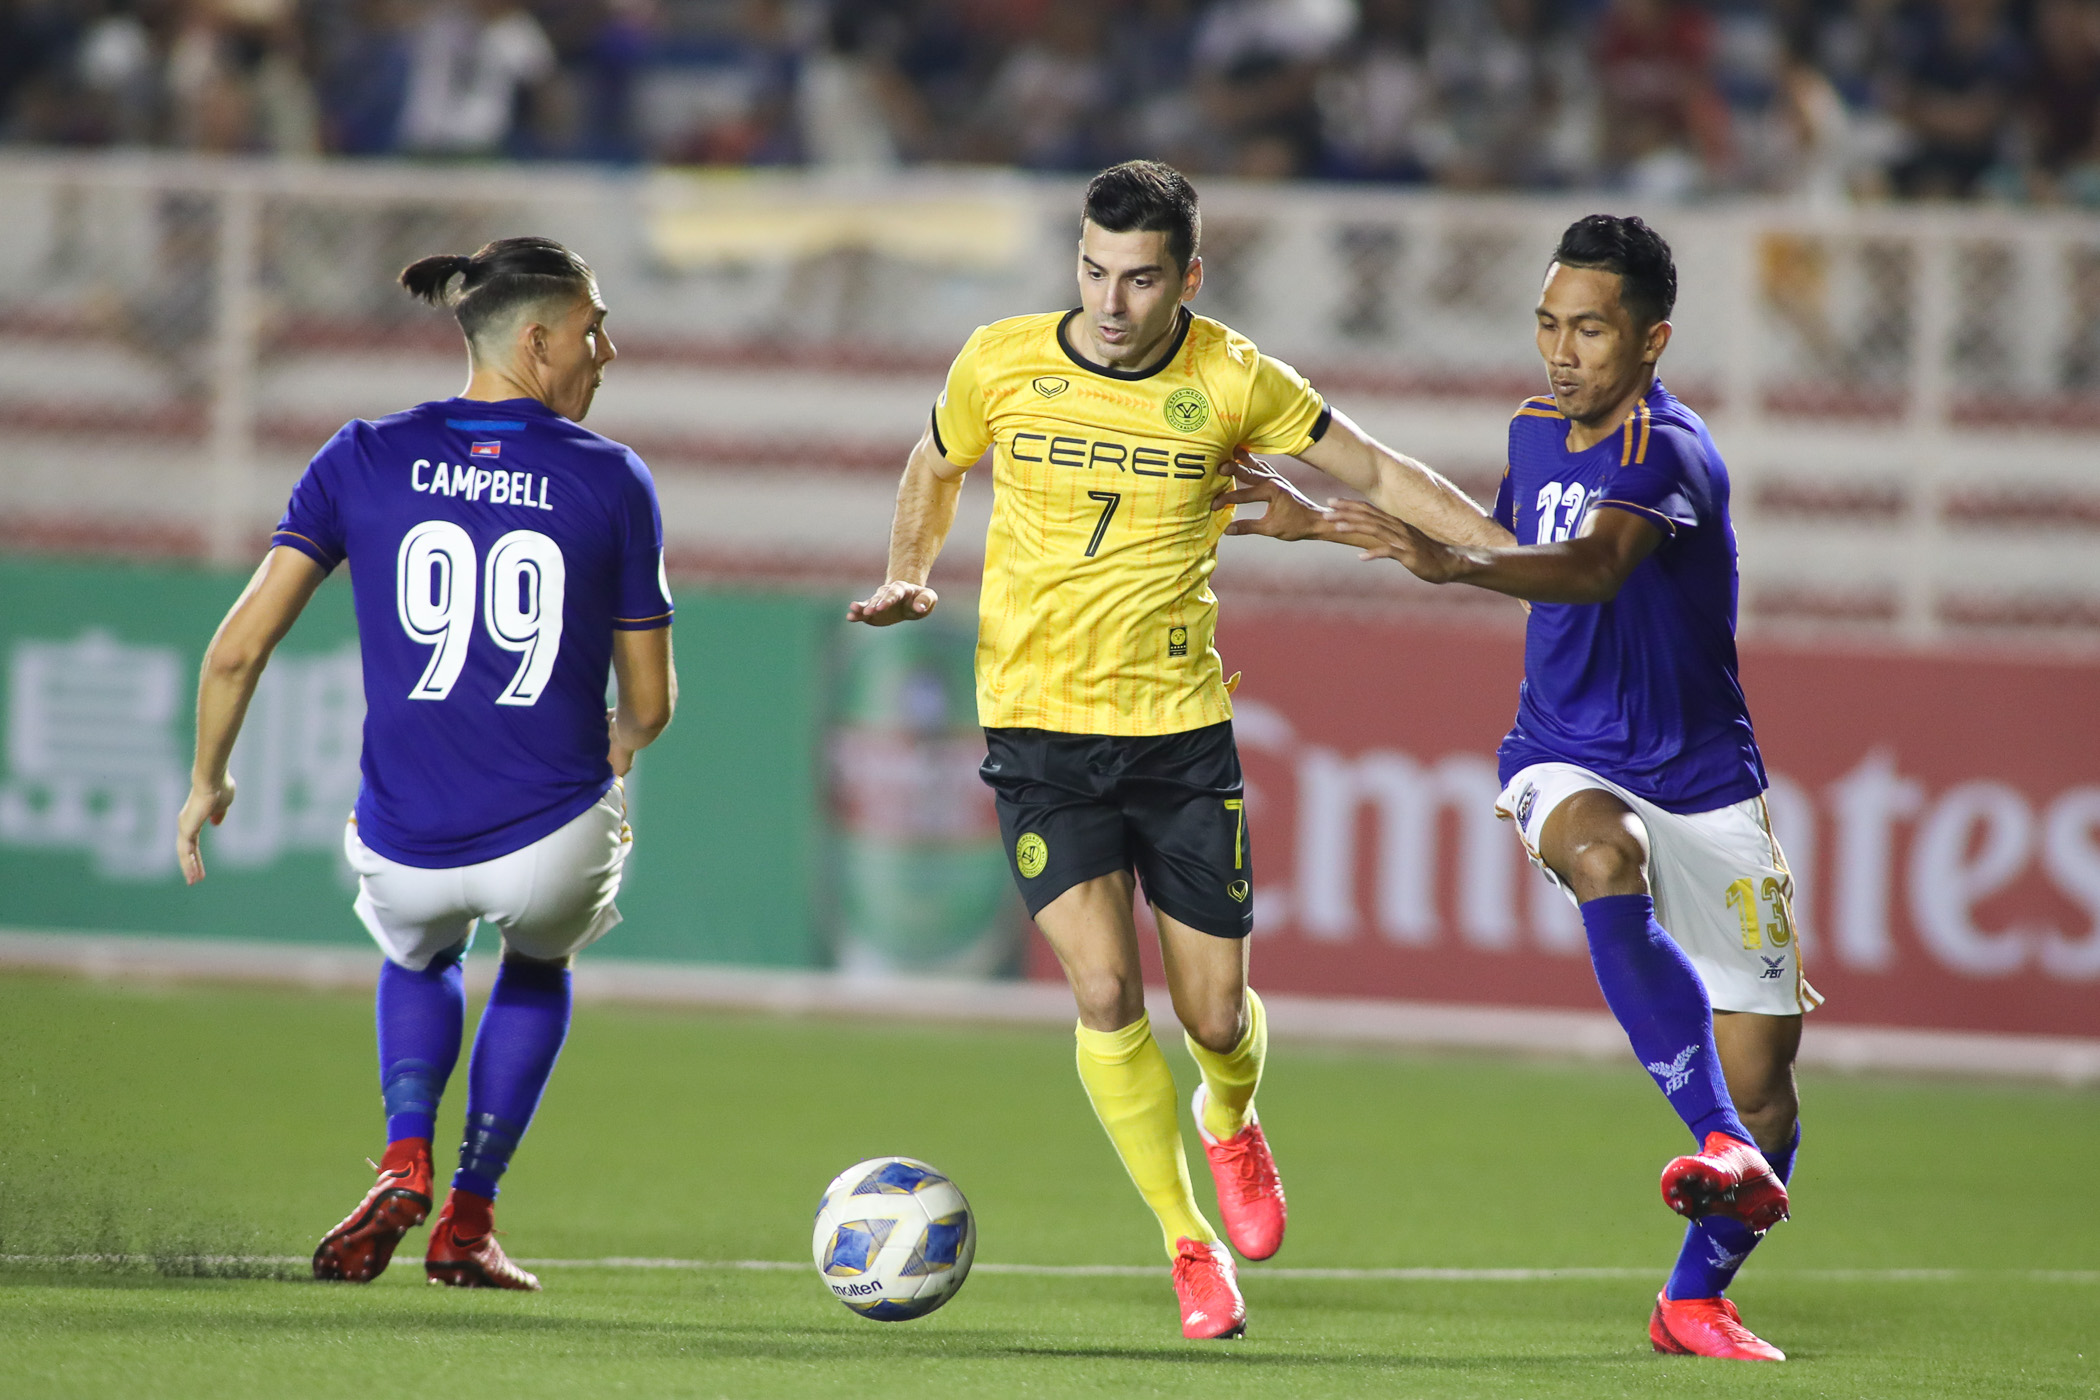 Ceres-Negros mauls Svay Rieng to open AFC Cup campaign